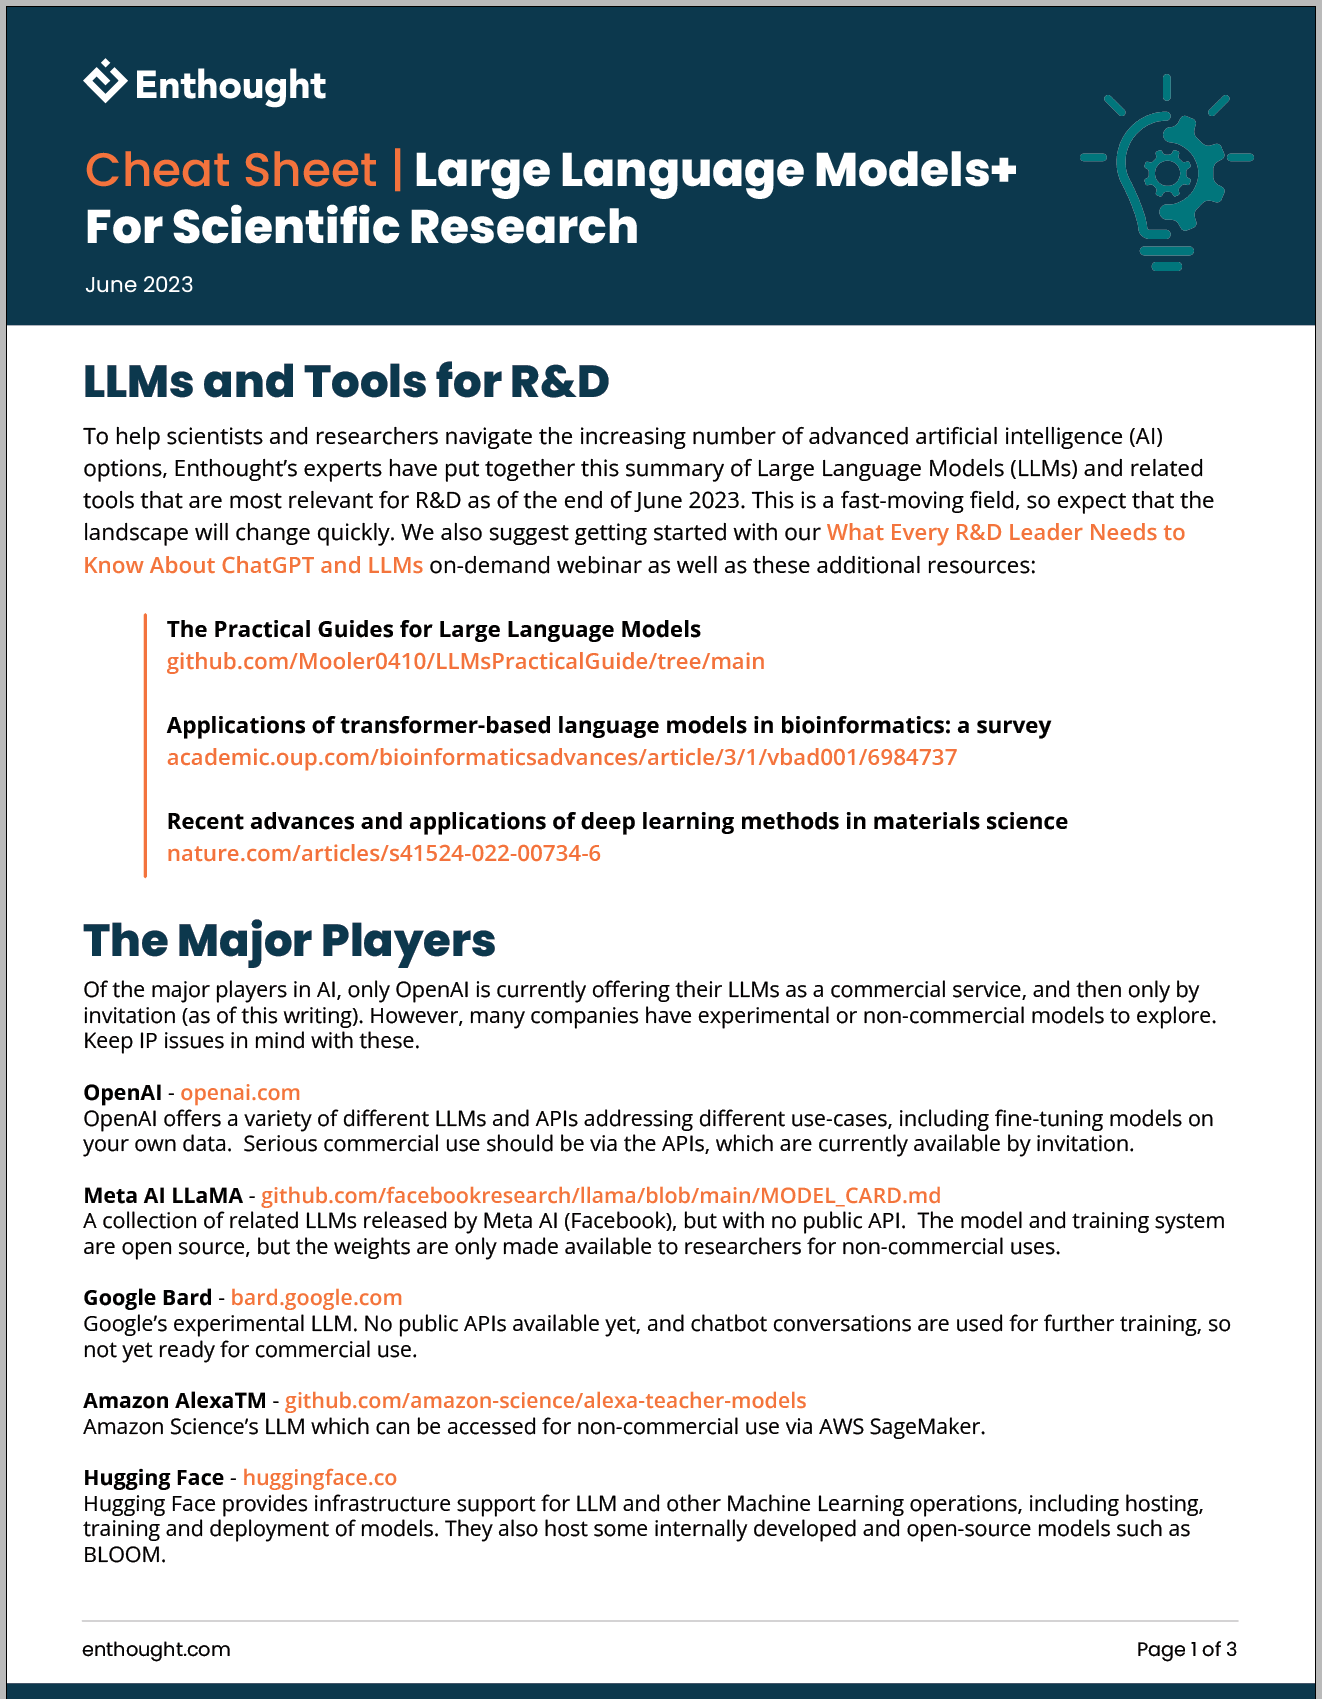 Cheat Sheet, Large Language Models+ For Scientific Research